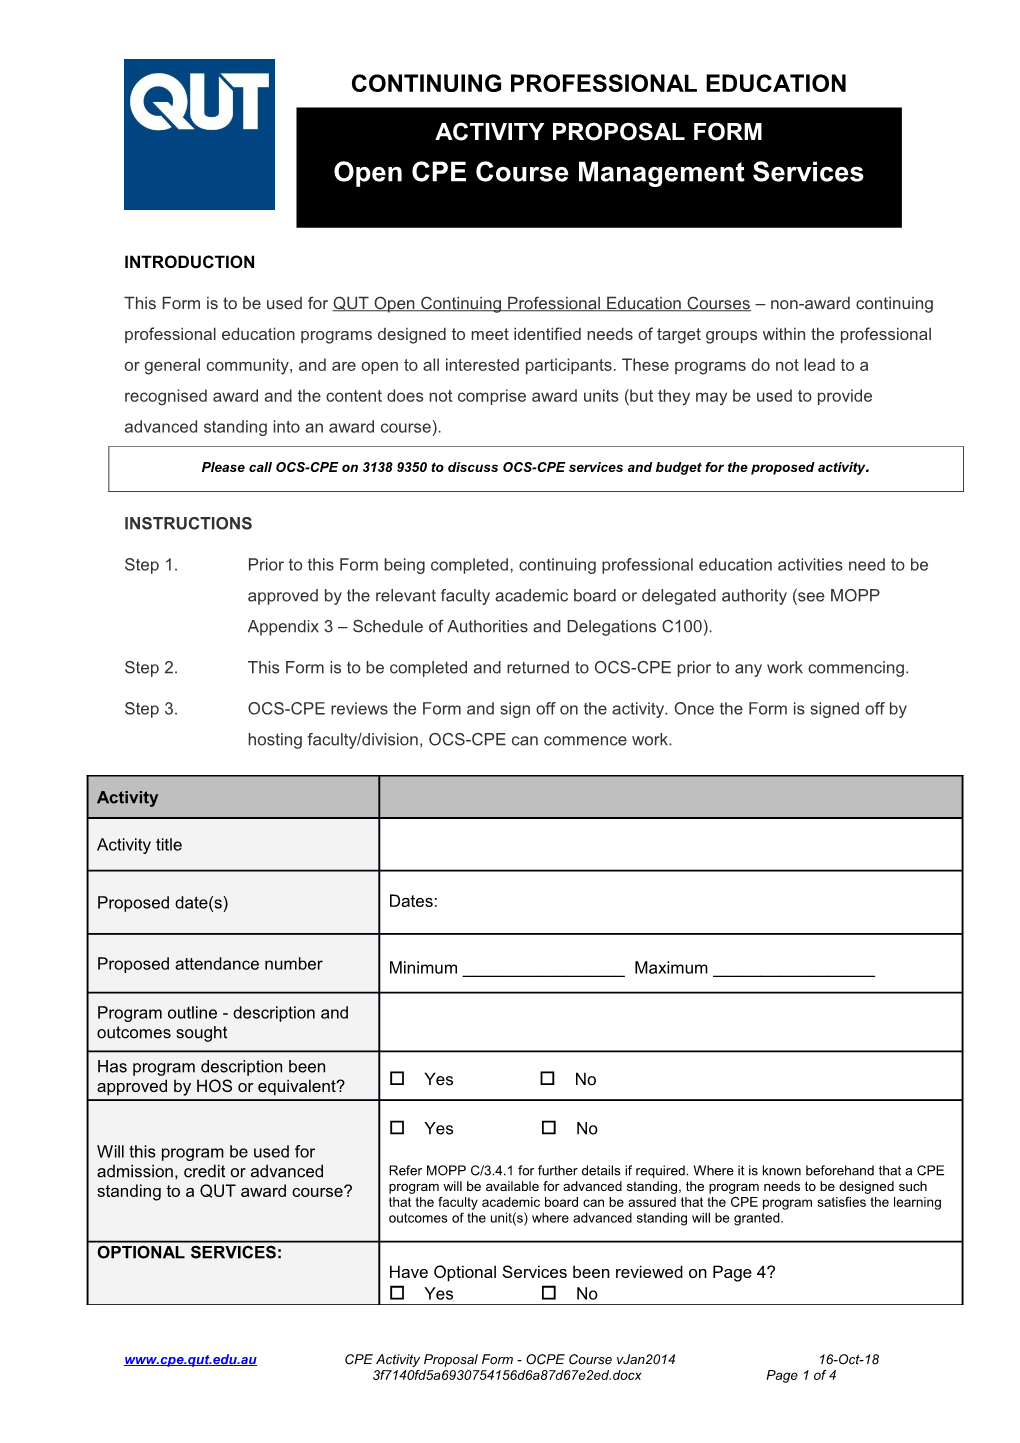 Open Continuing Professional Education Course Activity Proposal Form